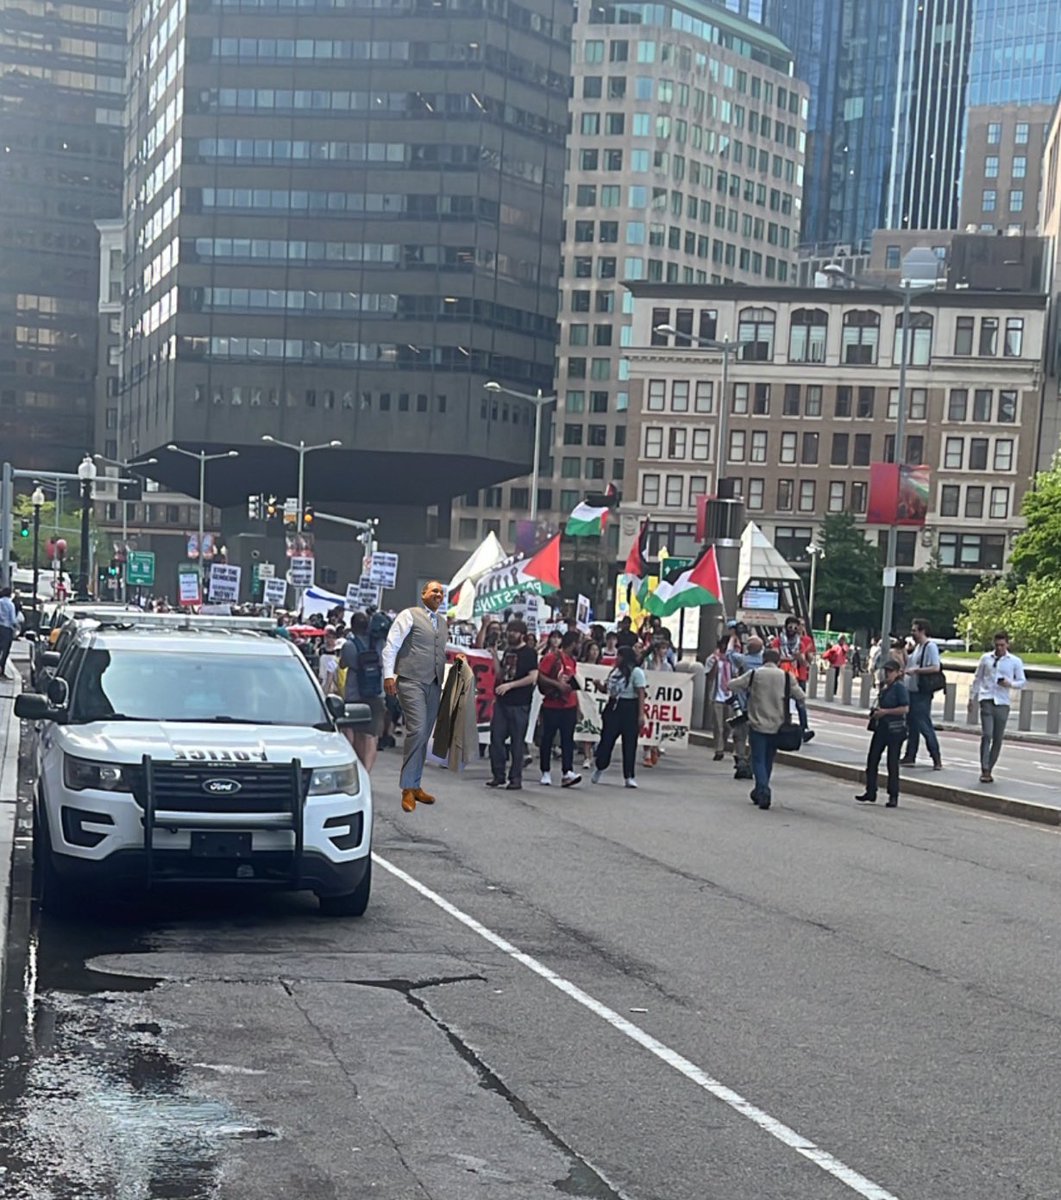 BREAKING NEWS:

@HoyaCoachCooley is seen leading the Pro-Palestine protesters at South Station. @WCVB please credit